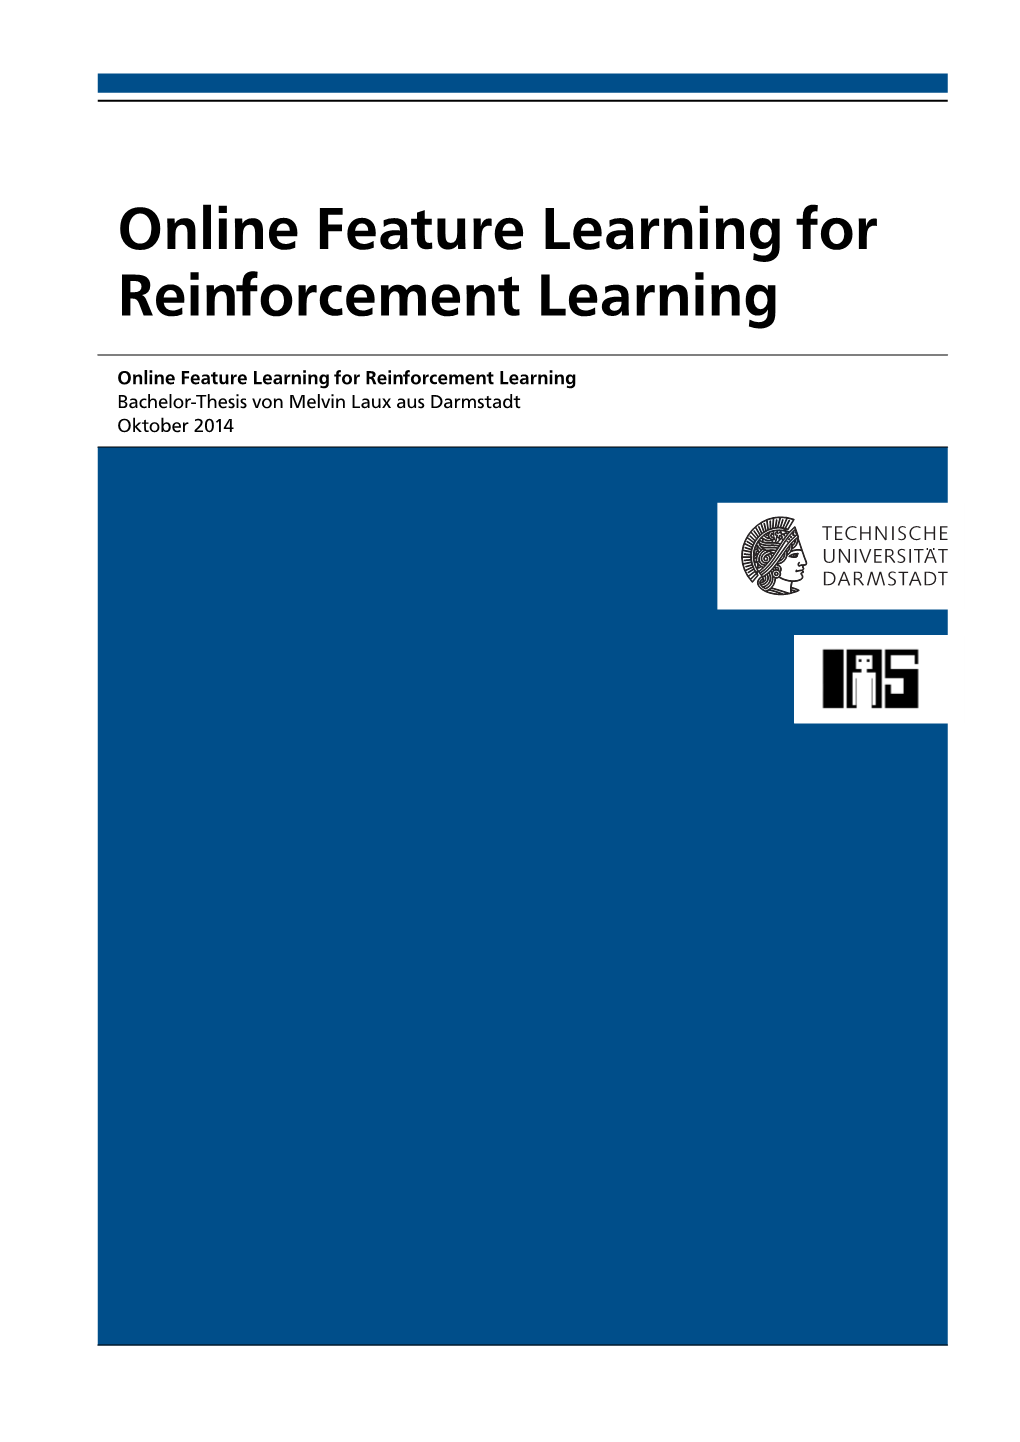 Online Feature Learning for Reinforcement Learning